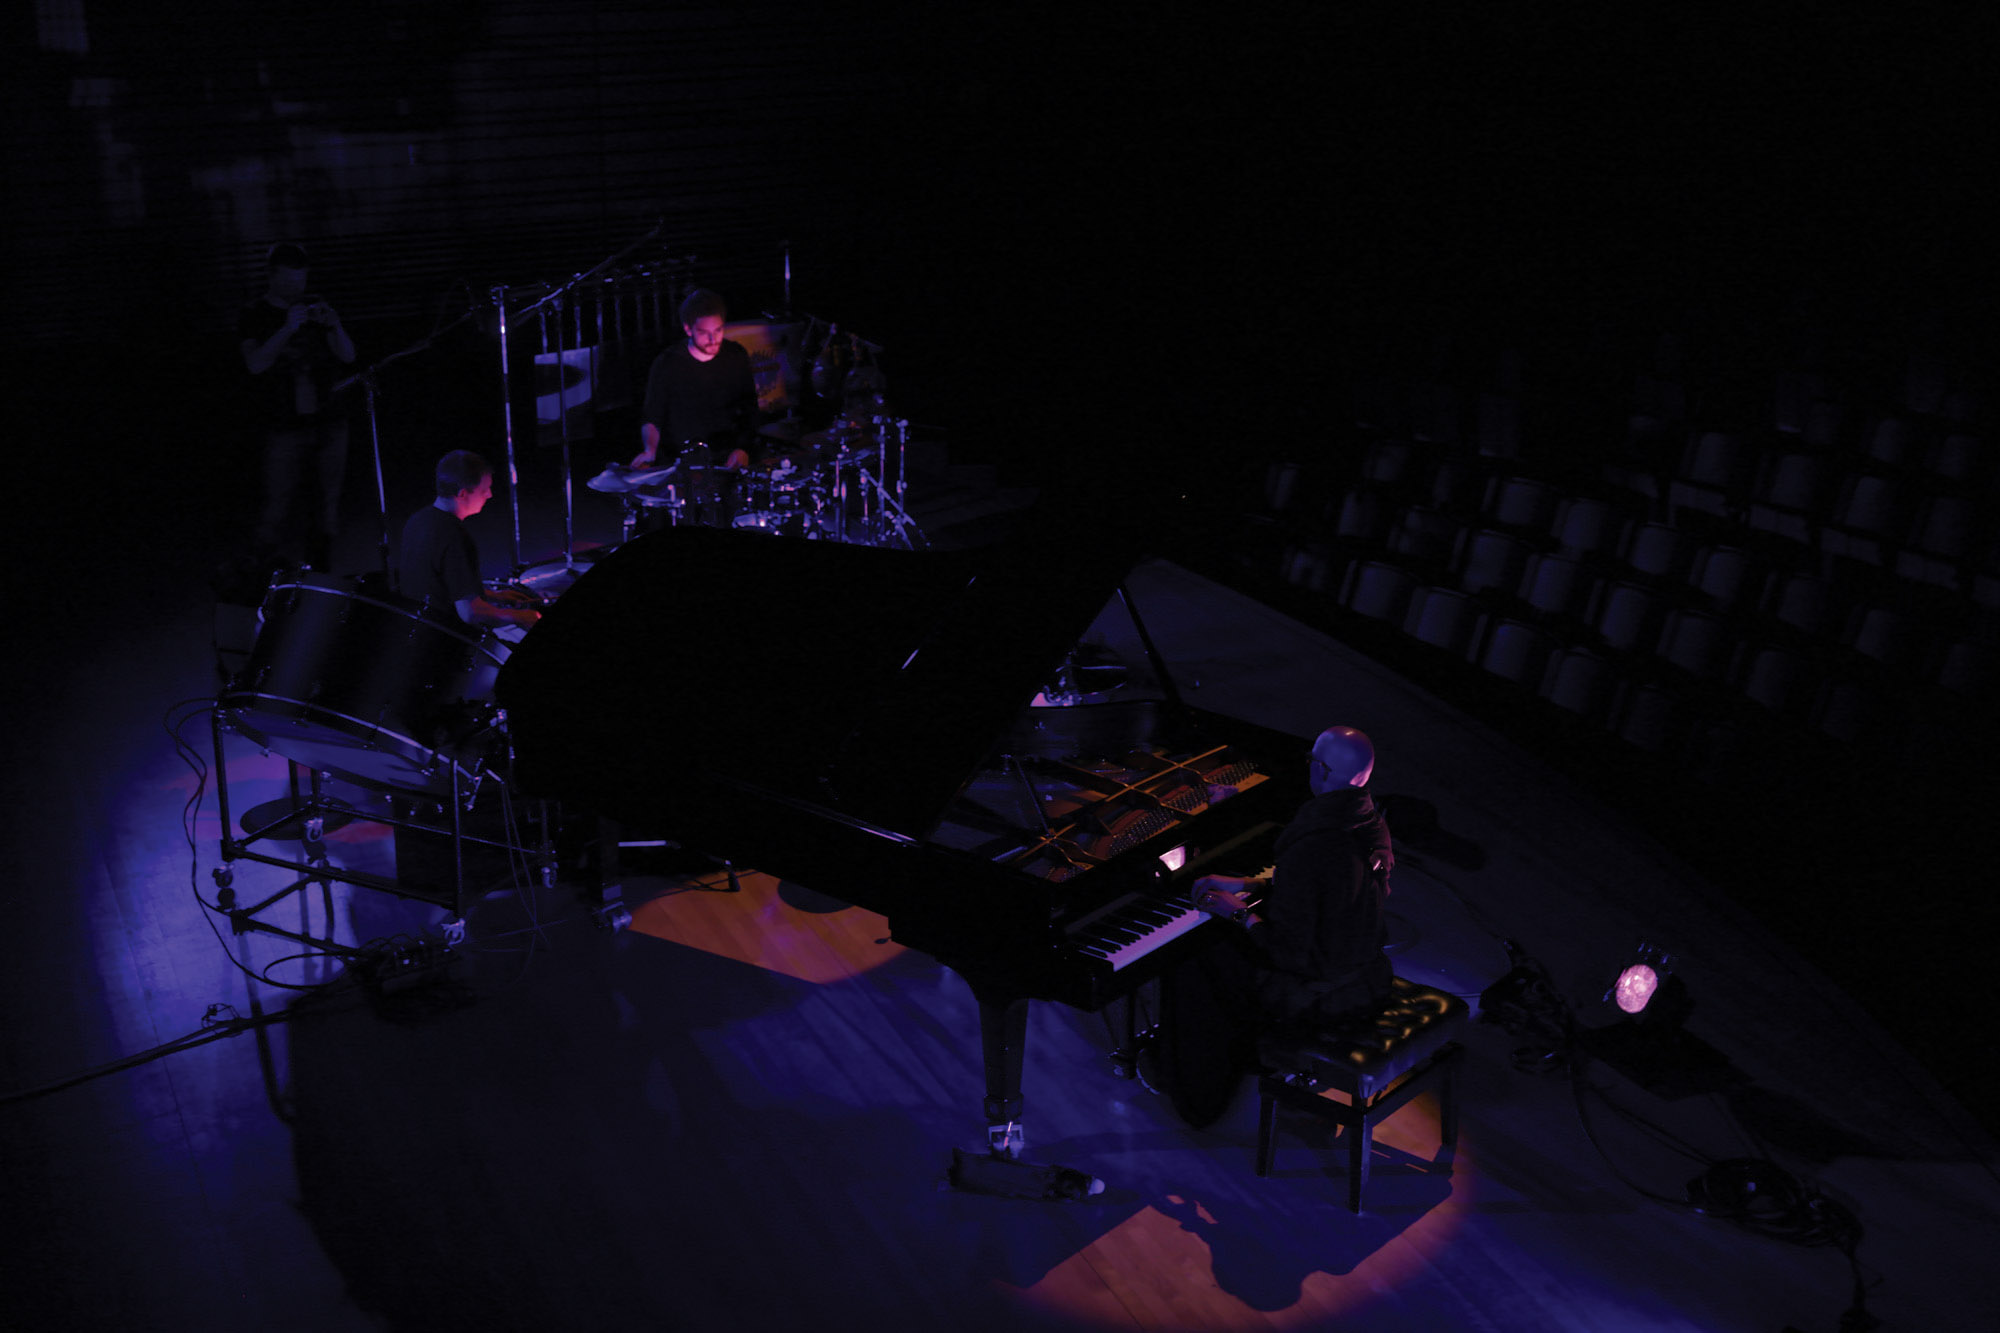 A small ensemble of three men, one playing piano and two on percussion, playing on the concert hall stage washed in blue/purple light. 